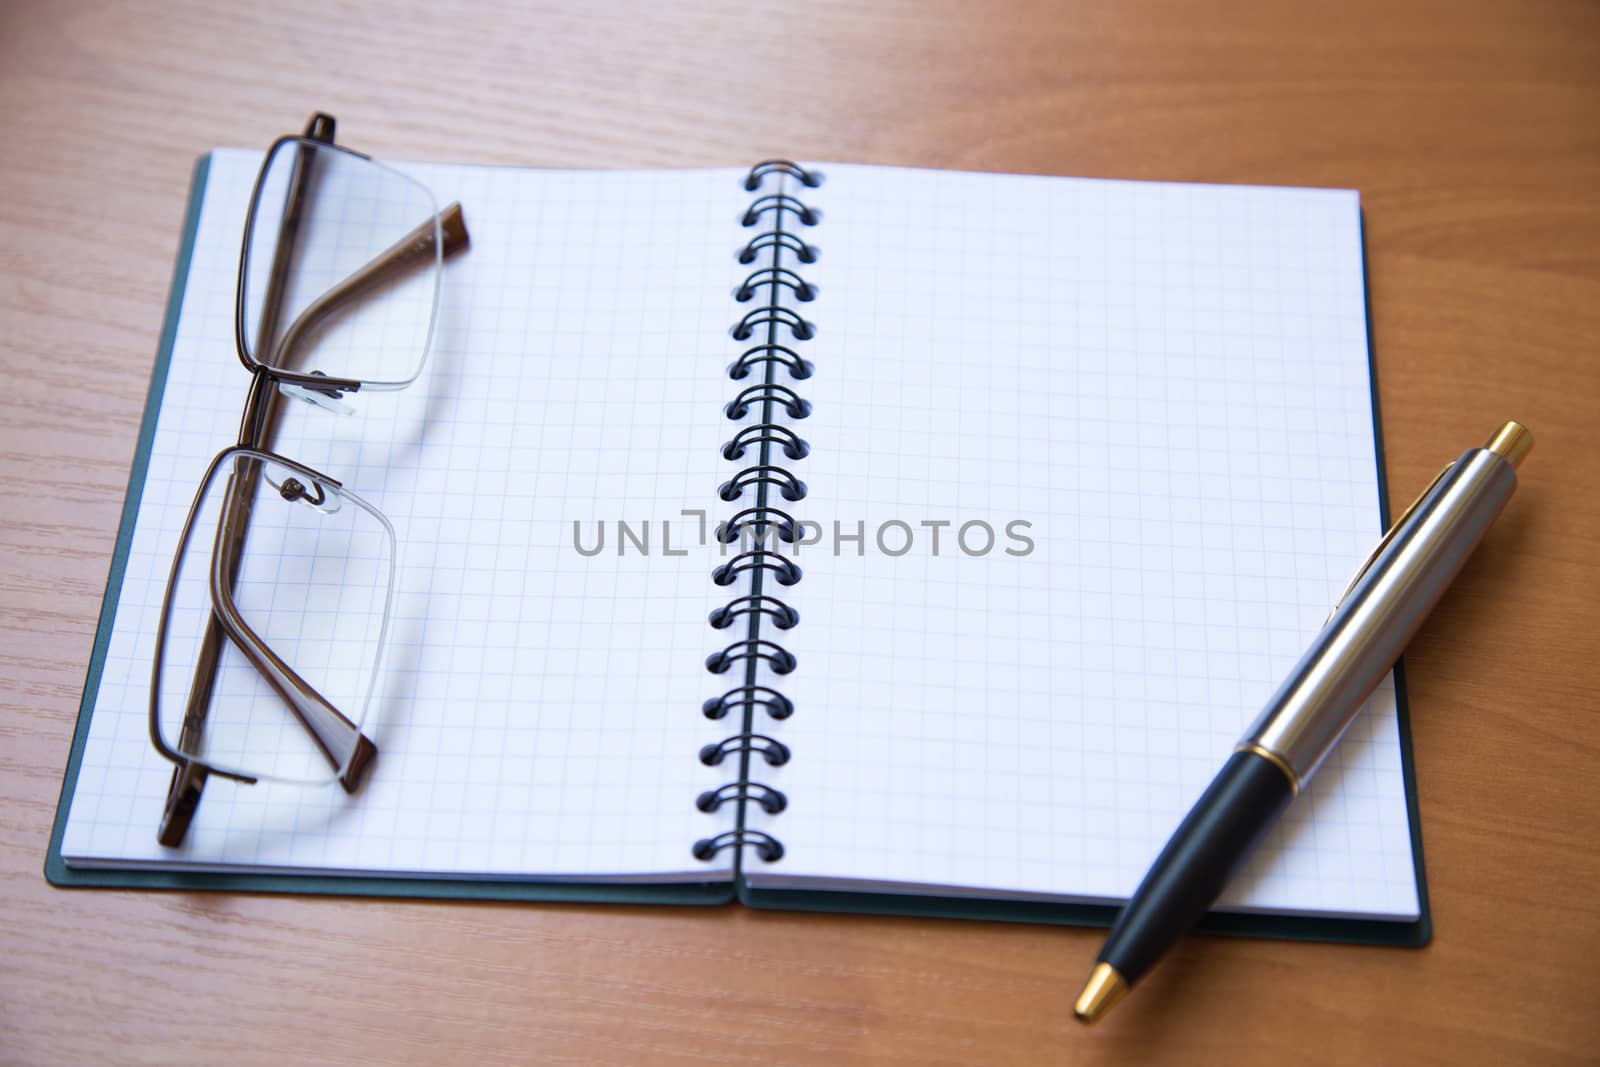 paper notebook with pen on wooden background